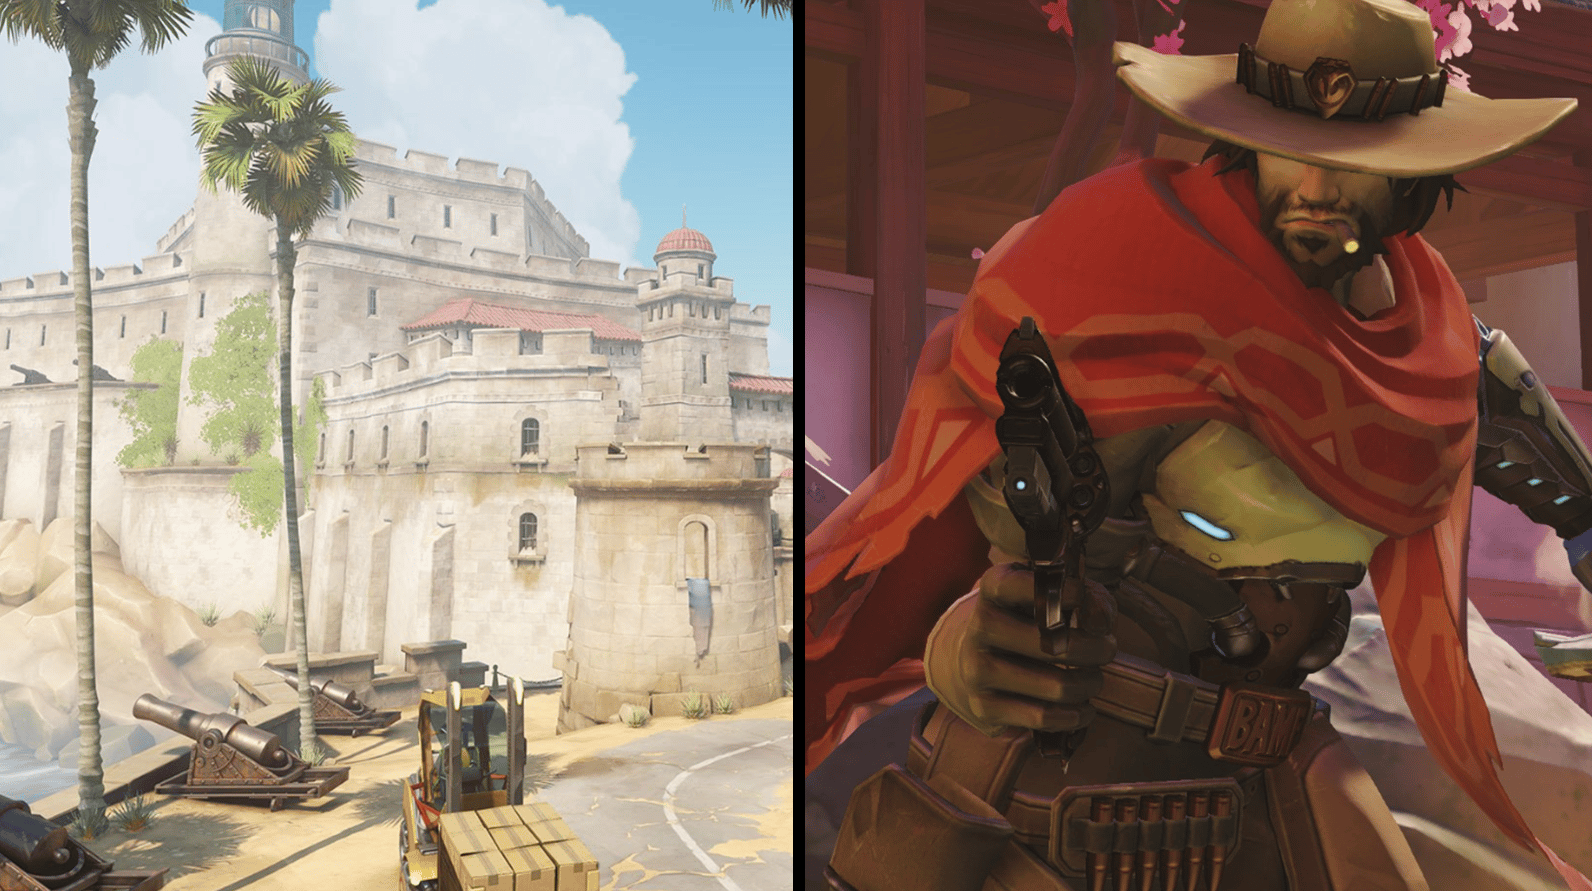 Overwatch Havana Escort map gives McCree cover while using his Deadeye ultimate ability